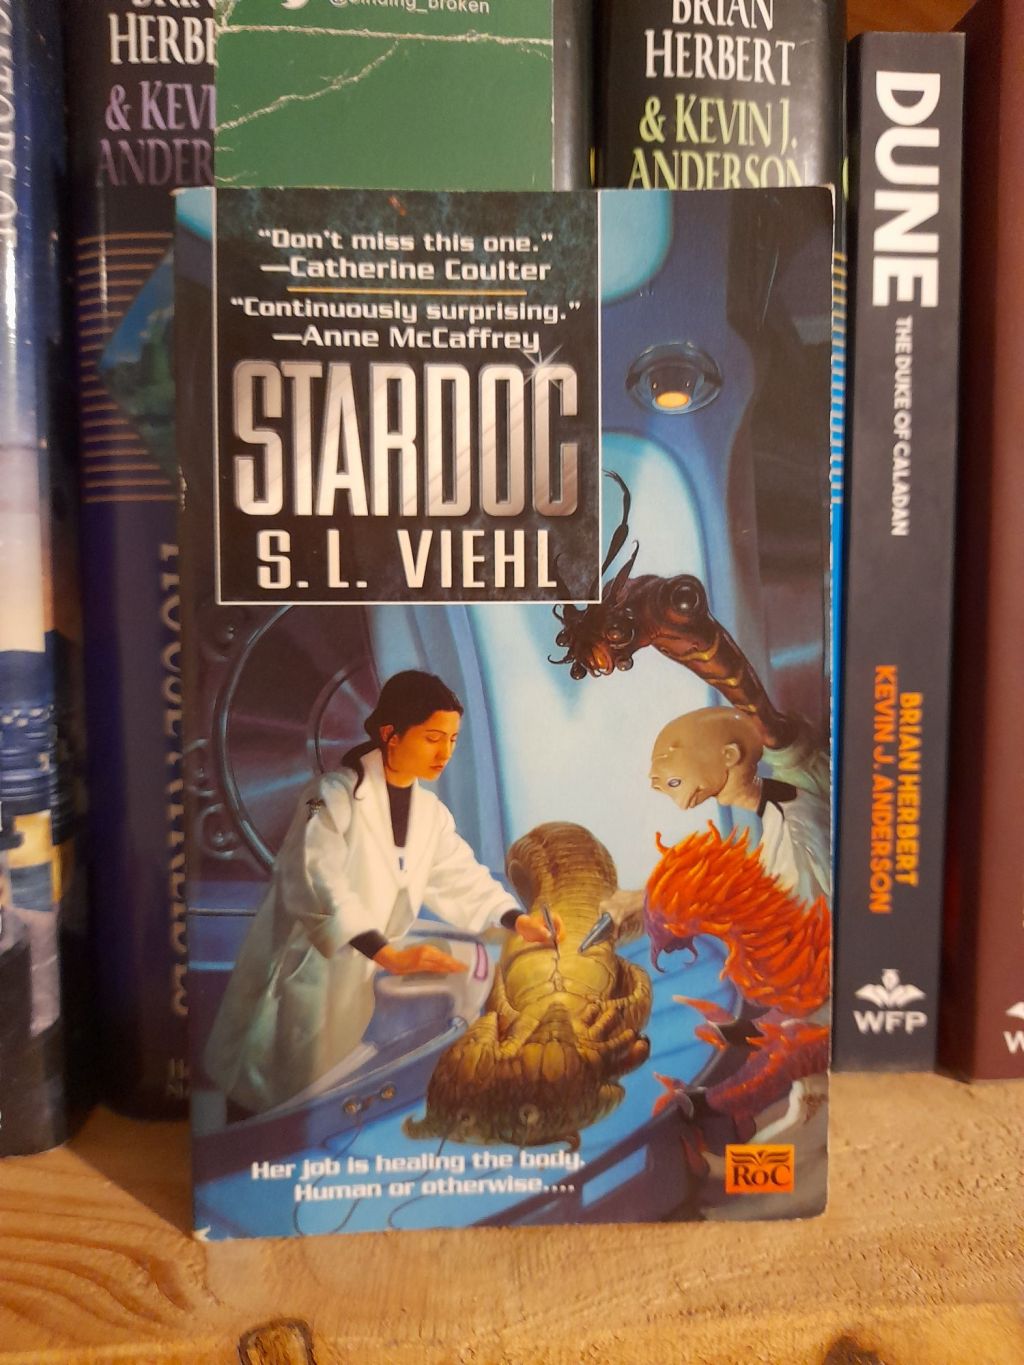 BOOK REVIEW: StarDoc, by S. L. Viehl